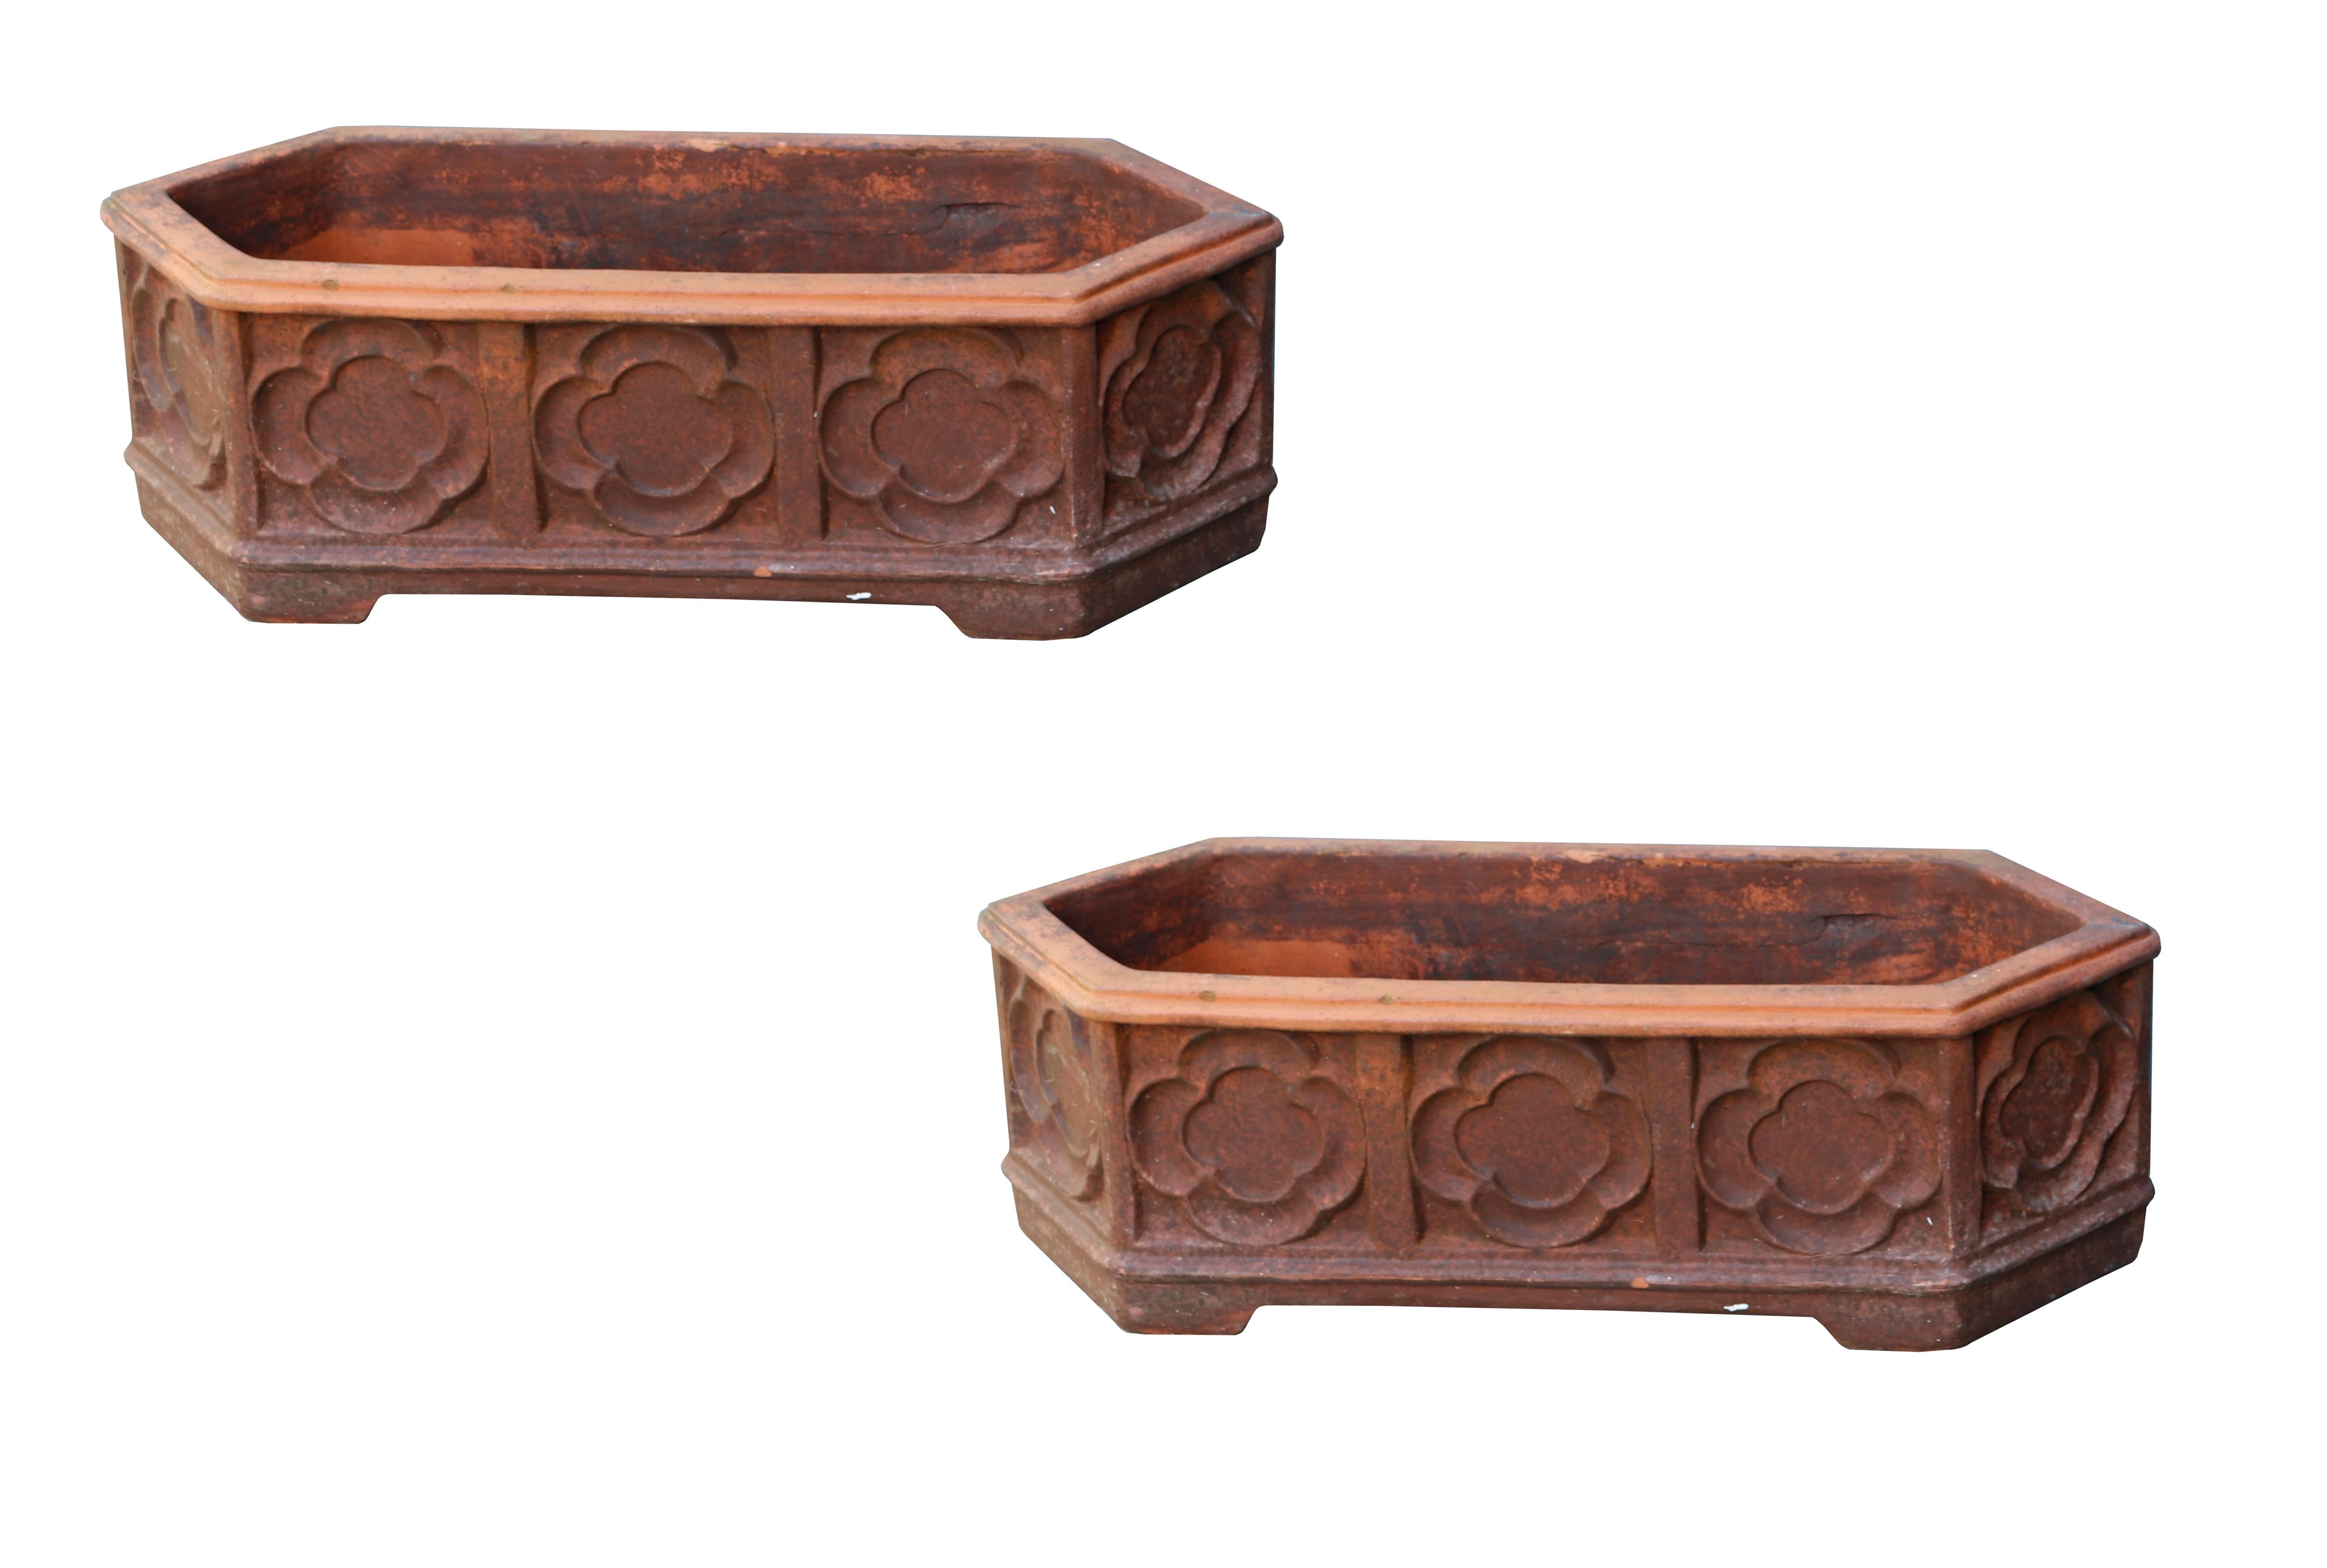 Terracotta Gothic style garden planters. Circa 1950, these reclaimed handcrafted terracotta planters are statement pieces. Both their size and appearance allude to certain Gothic styles and would contrast brilliantly with a vibrant plant to